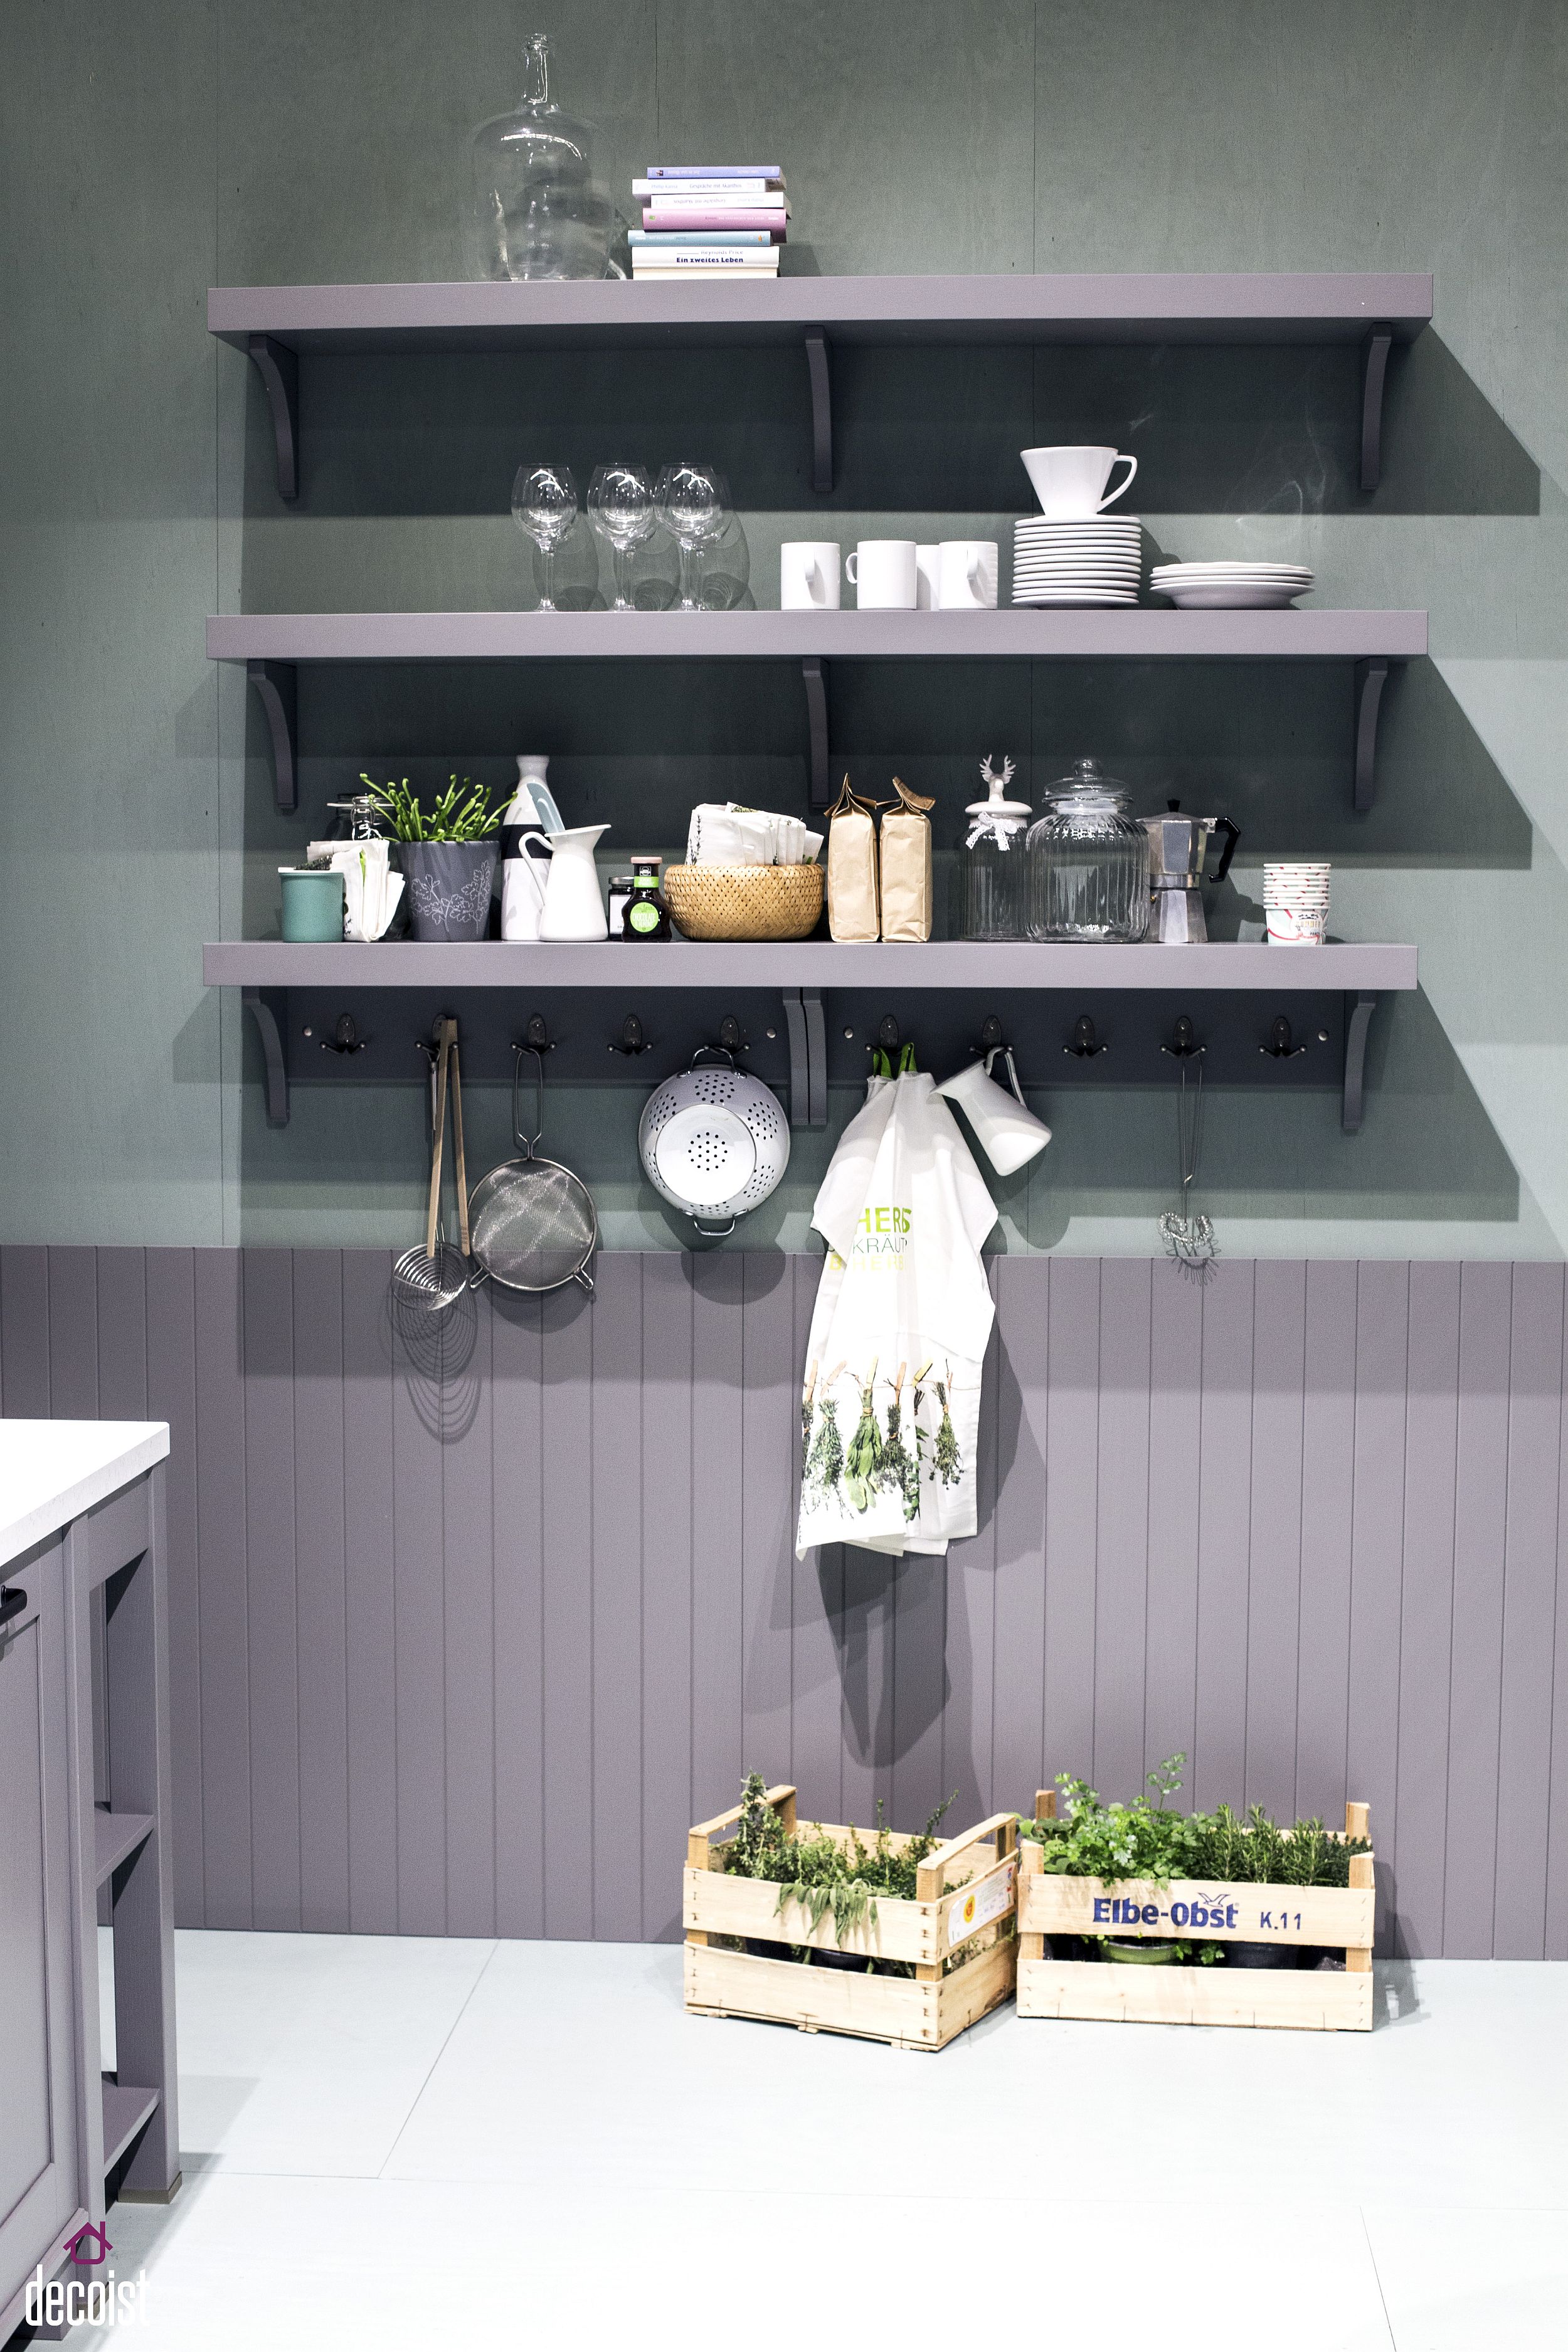 practical and trendy open shelving ideas for the modern kitchen slim floating shelves gray create smart space savvy display over island limed oak heavy duty aluminum shelf